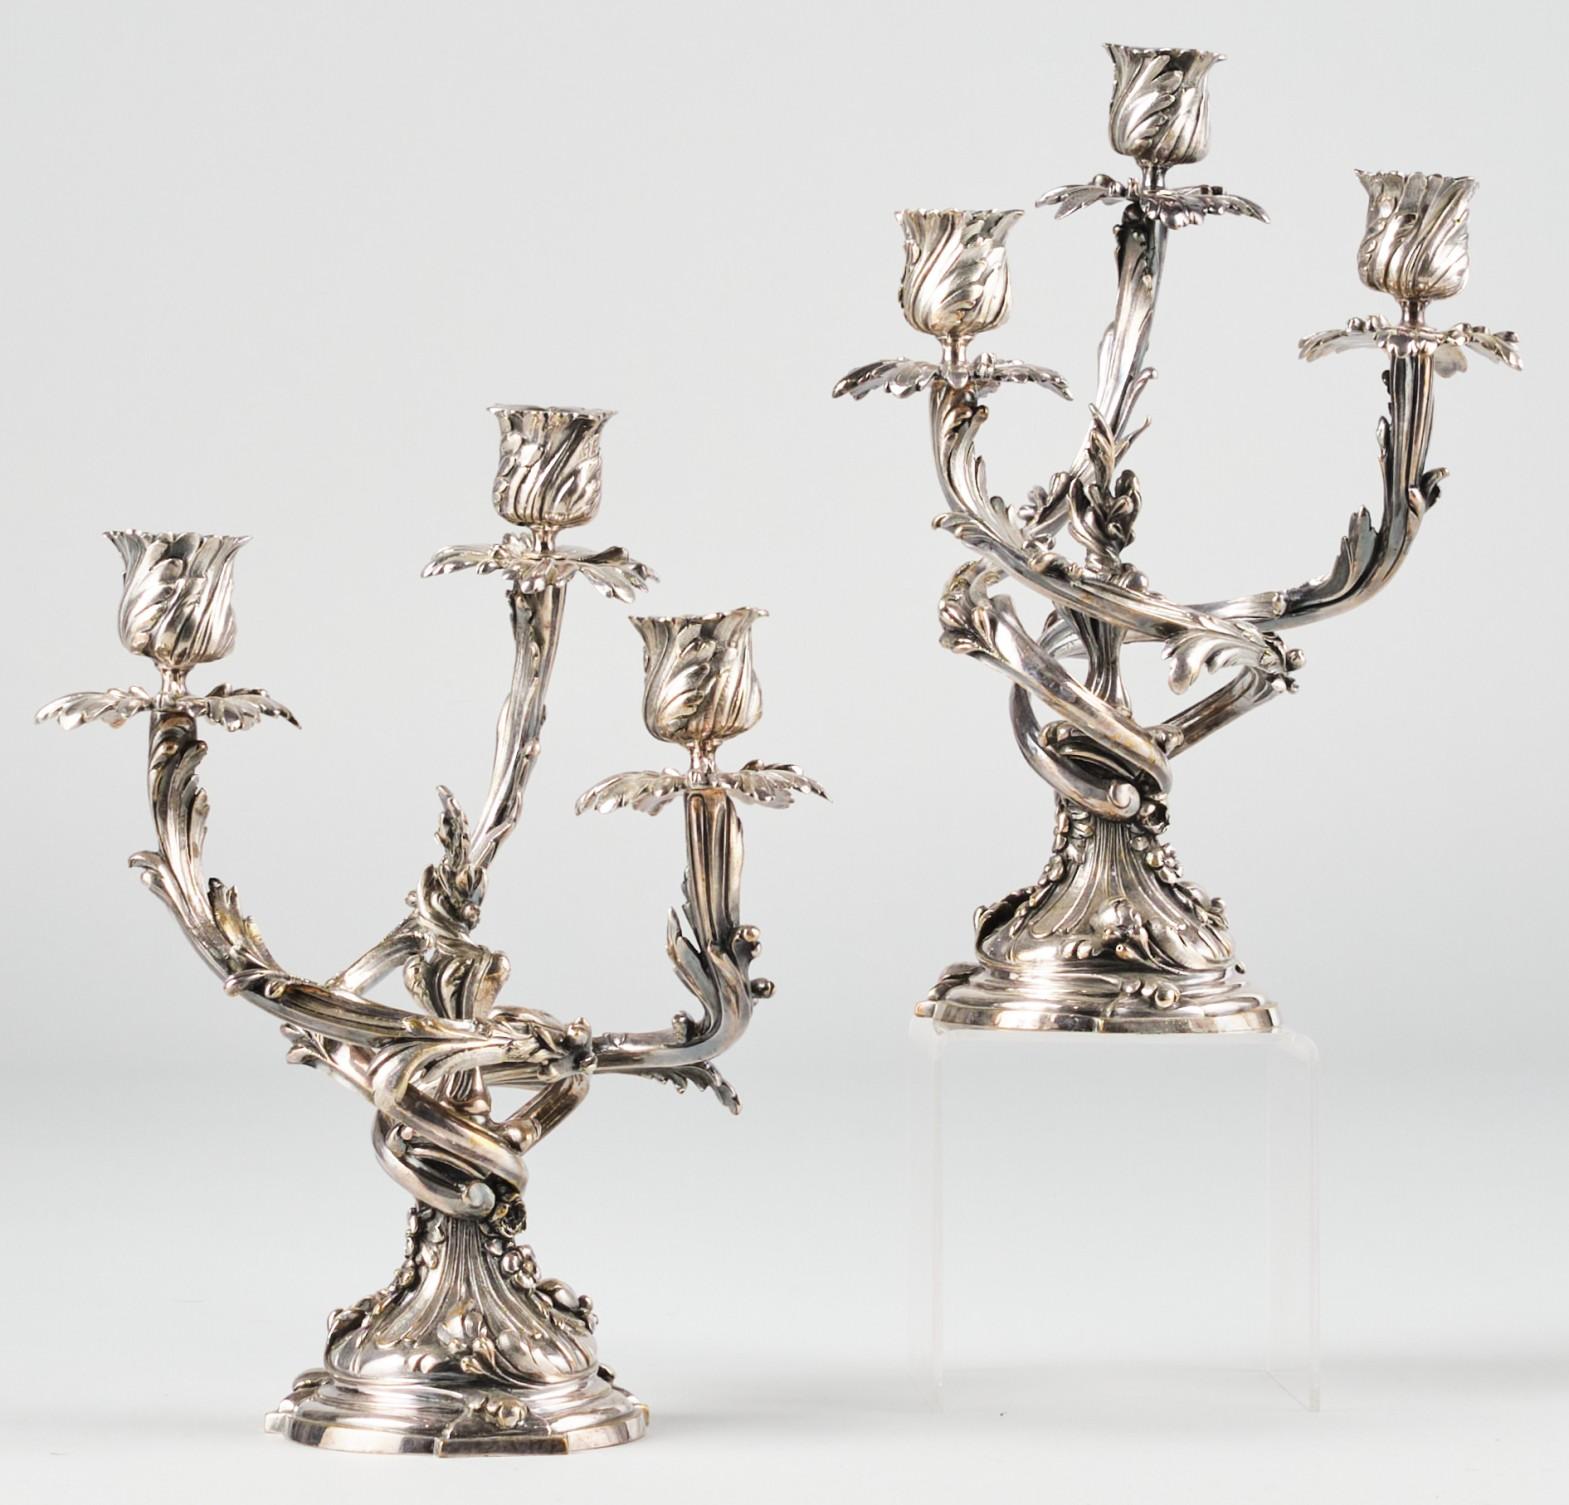 A very handsome pair of 19th century silvered bronze 3 branch candelabra in the style of Louis XV. Both showing a trio of richly cast foliate shaped branches fitted with detachable tulip shaped nozzles atop leafy bobeches, rising from